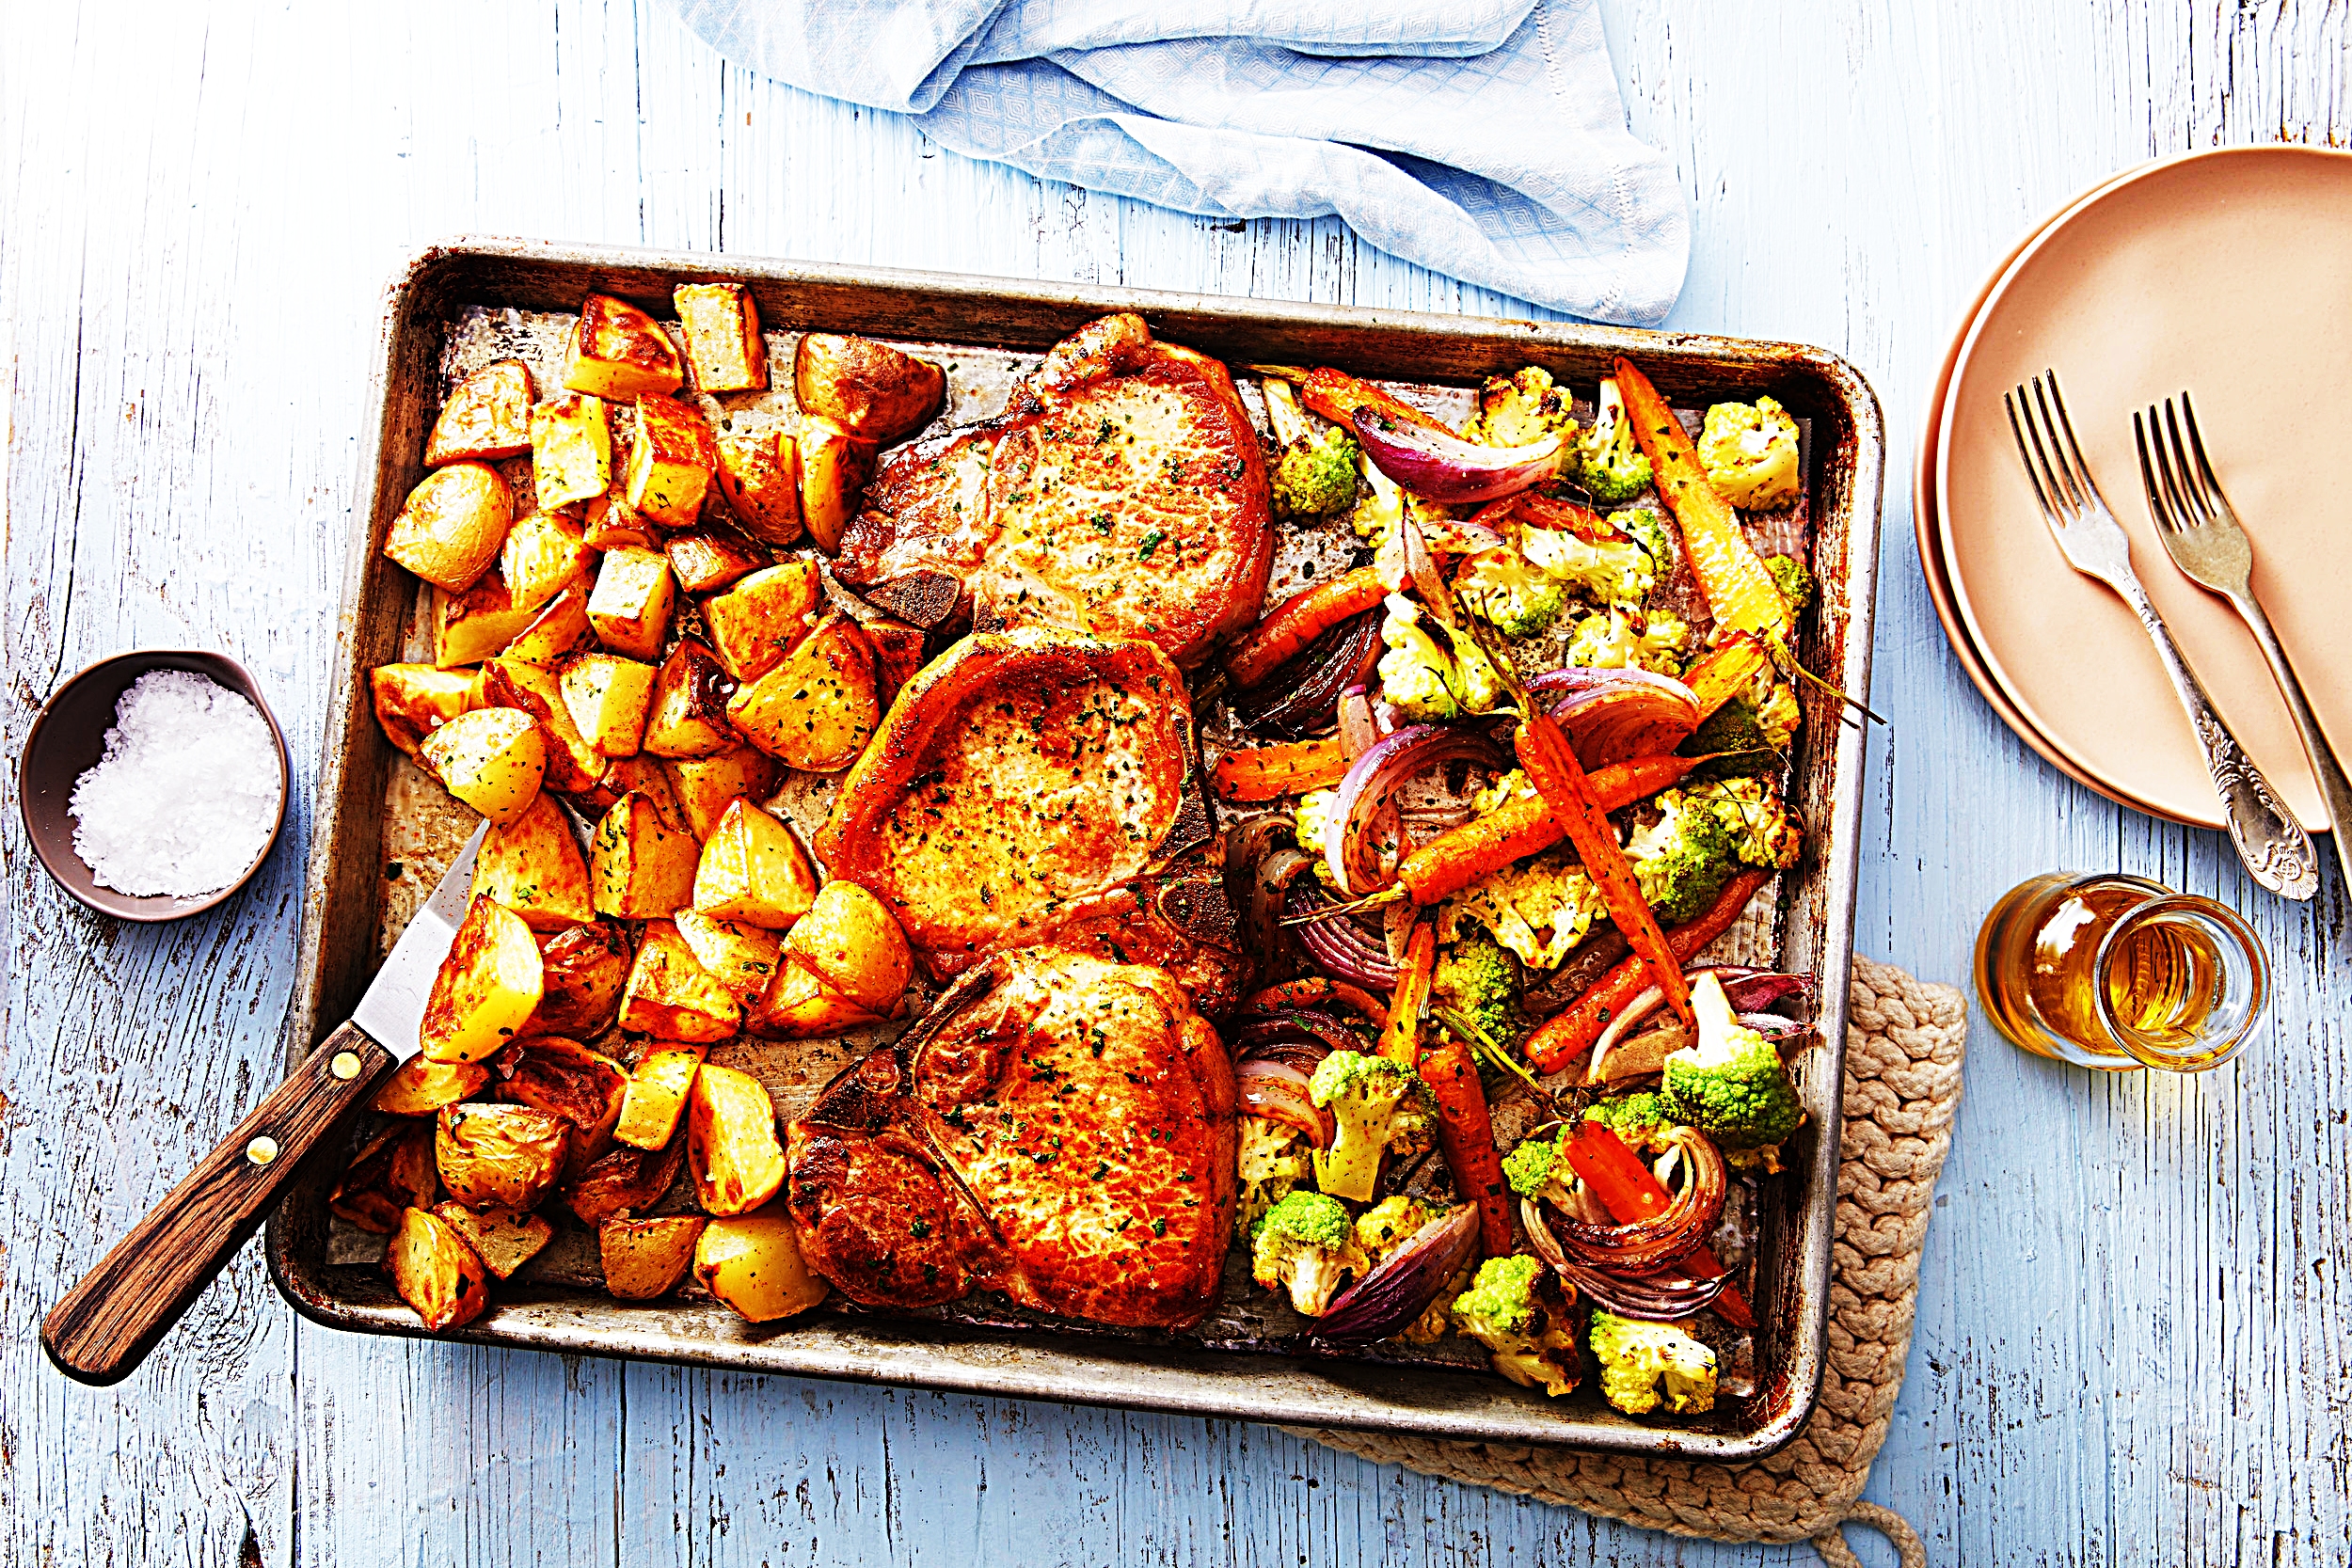 Stupid-Easy Recipe for Quick & Easy Sheet Pan Pork Chops with Roasted Potatoes and Veggies (#1 Top-Rated)